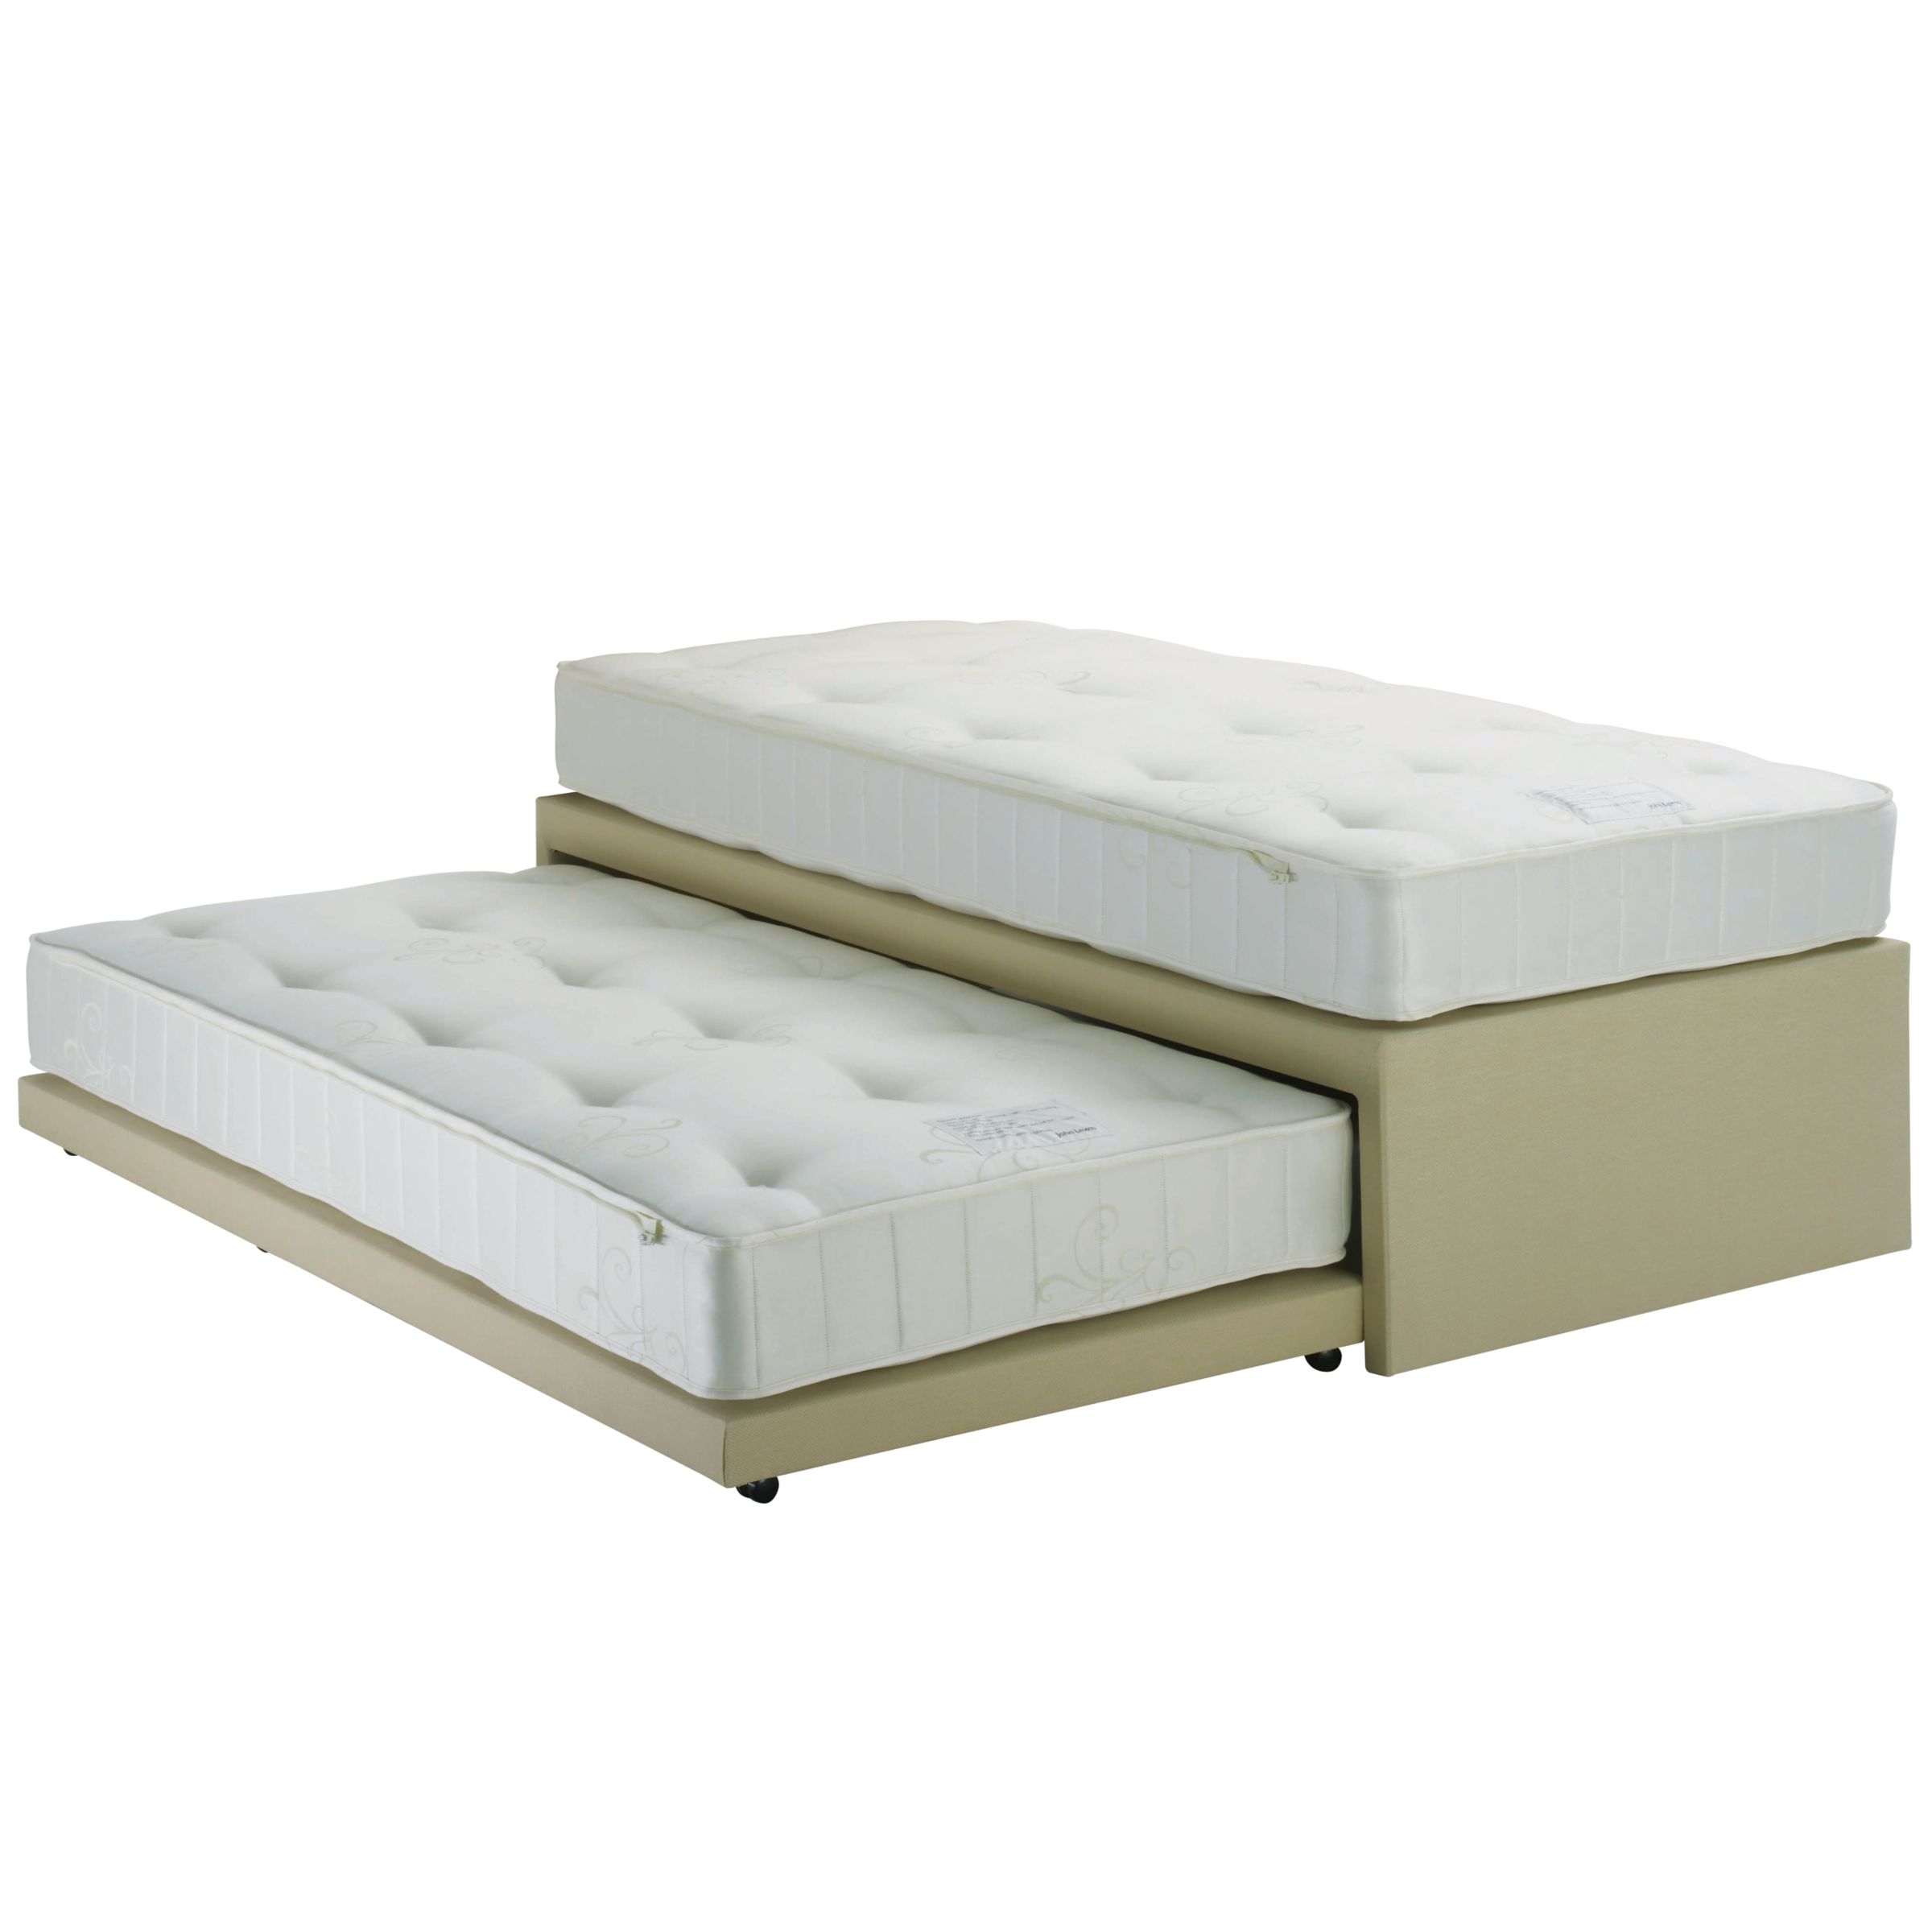 Newton Guest Bed, Single, 2 Pocket